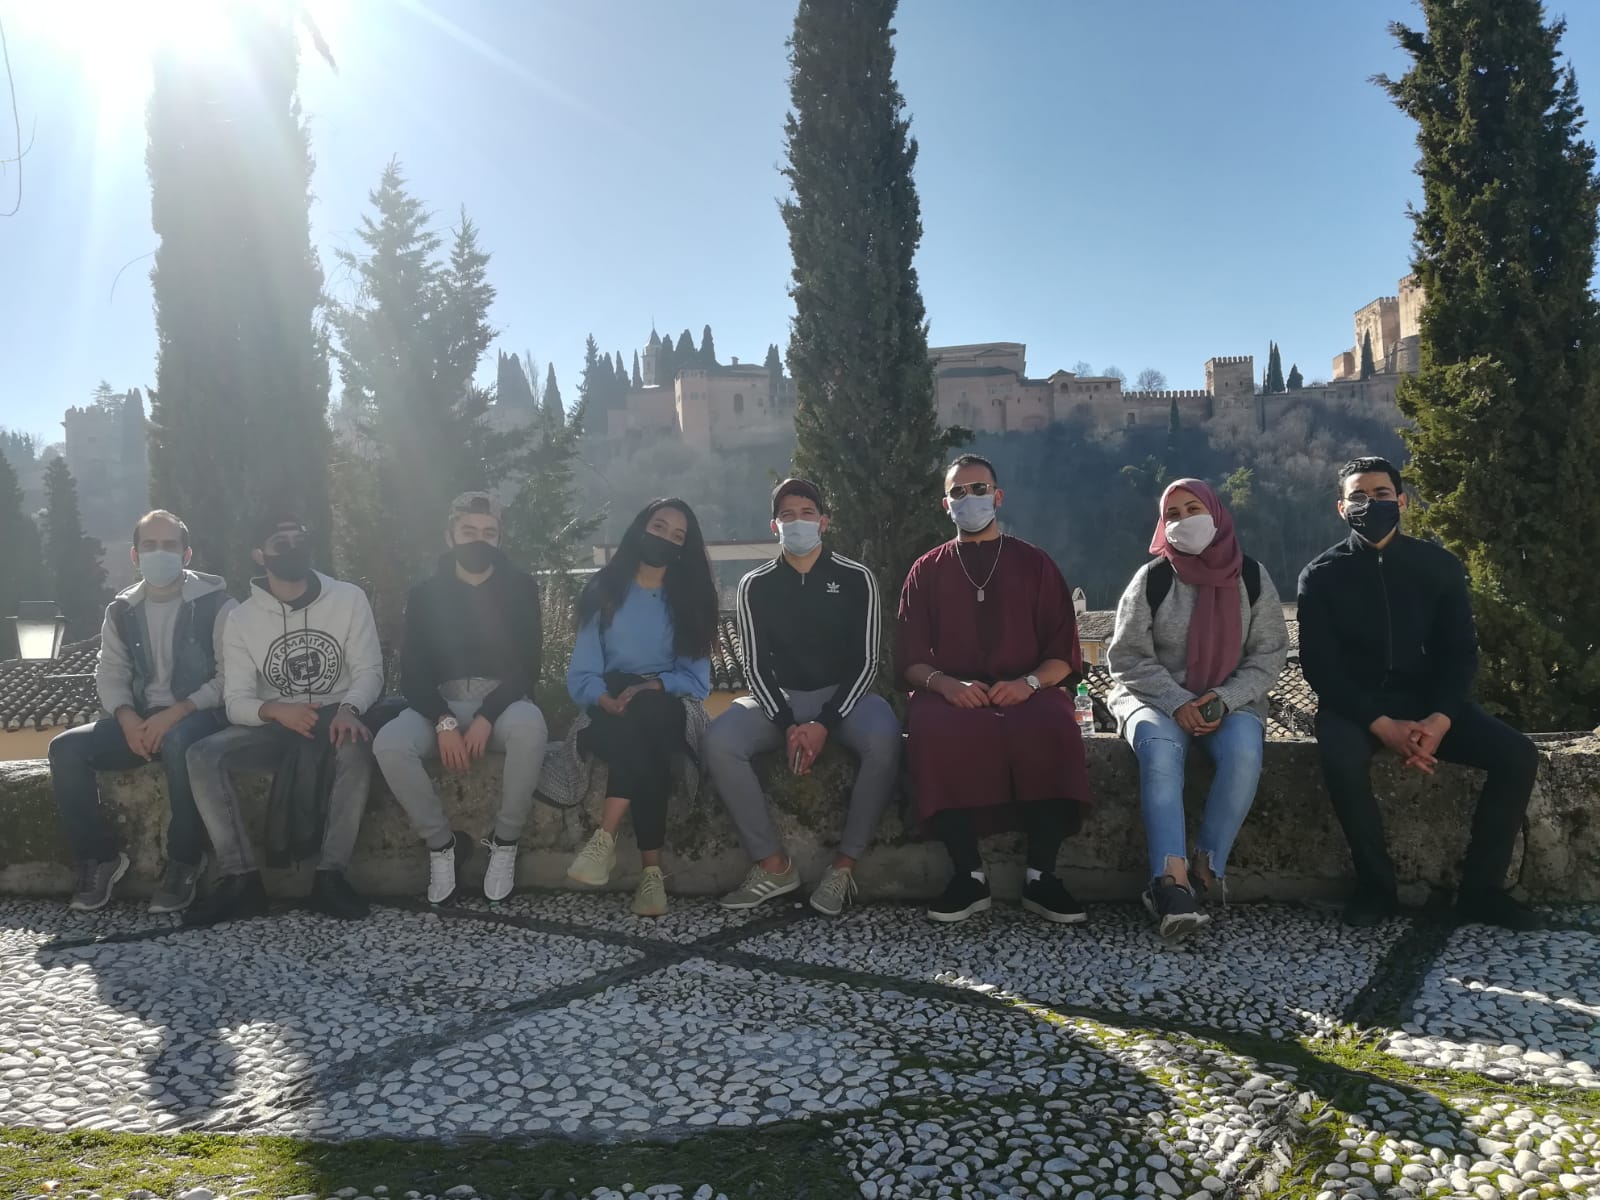 Guided visit to the Alhambra in Granada